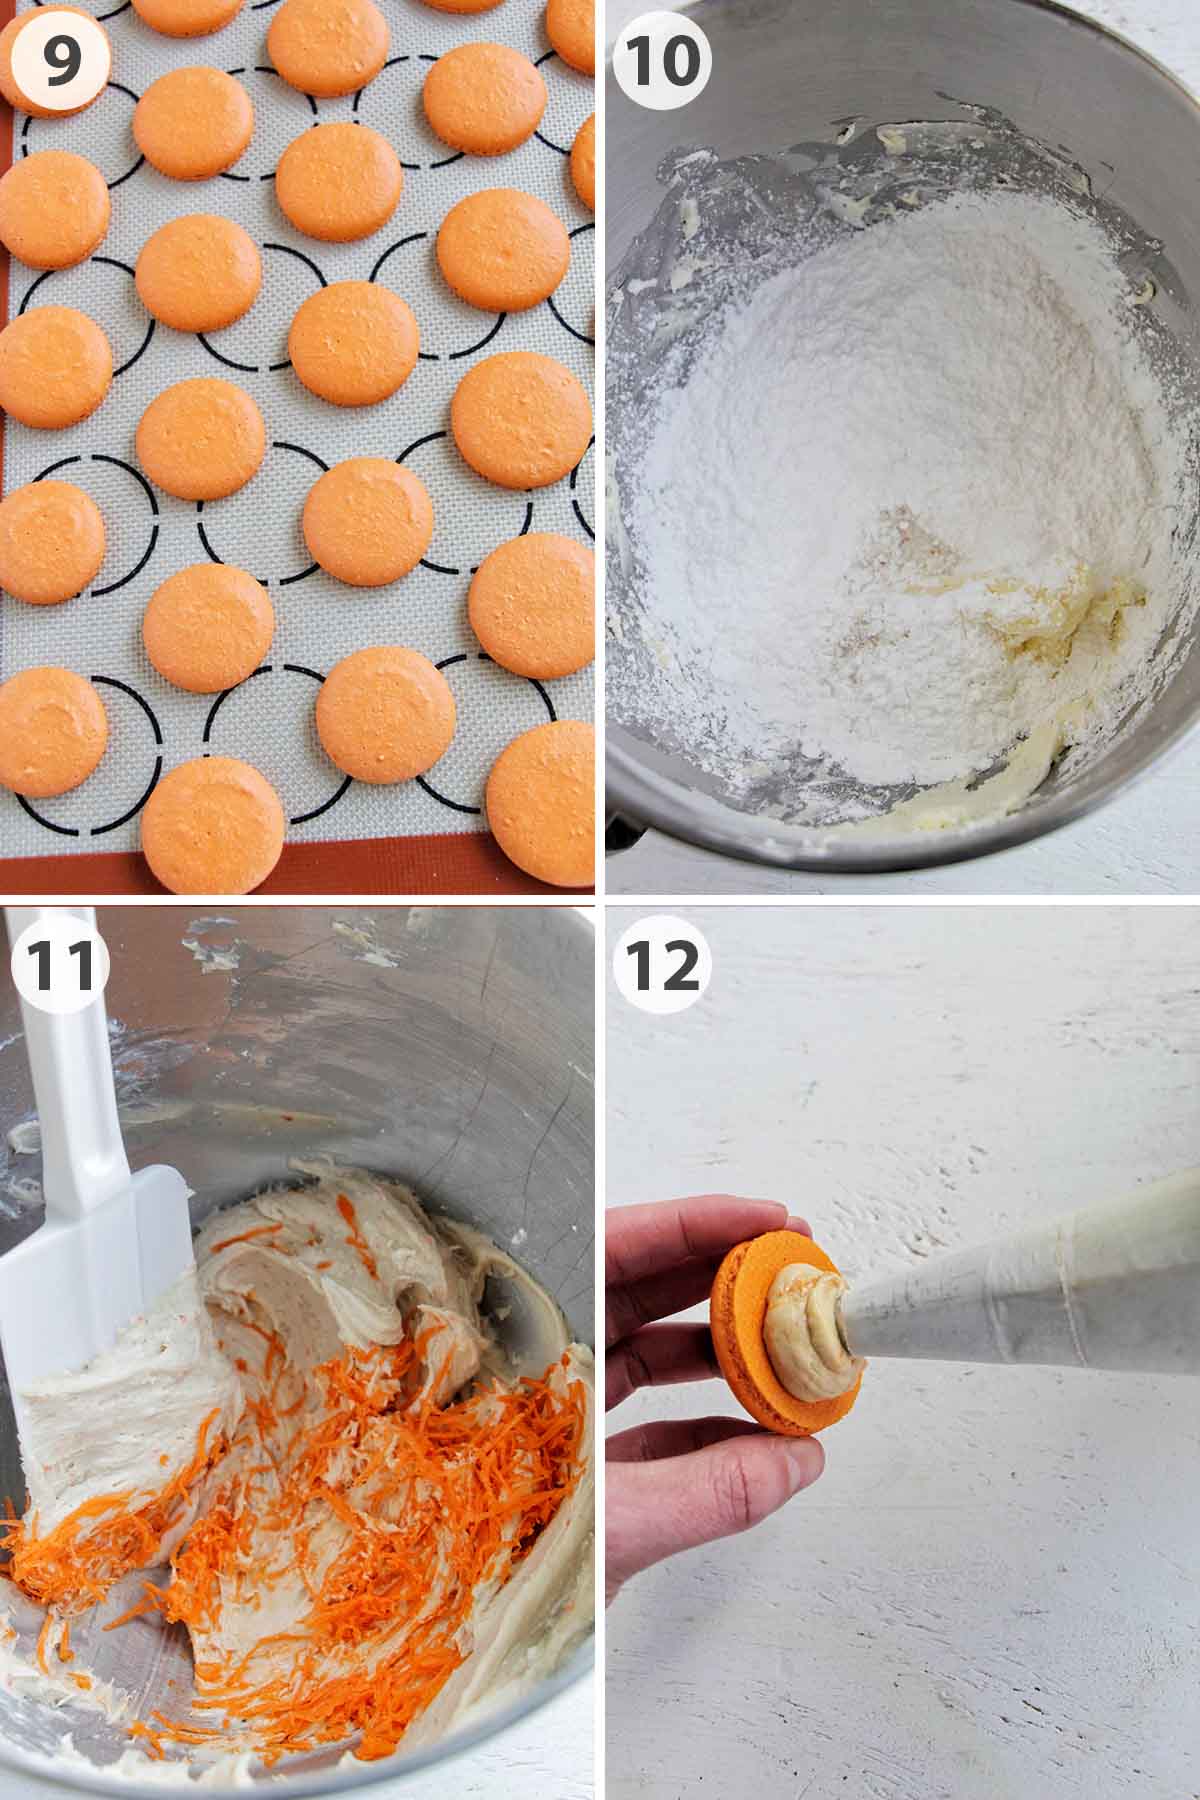 four numbered photos showing how to make carrot cake filling for macarons.